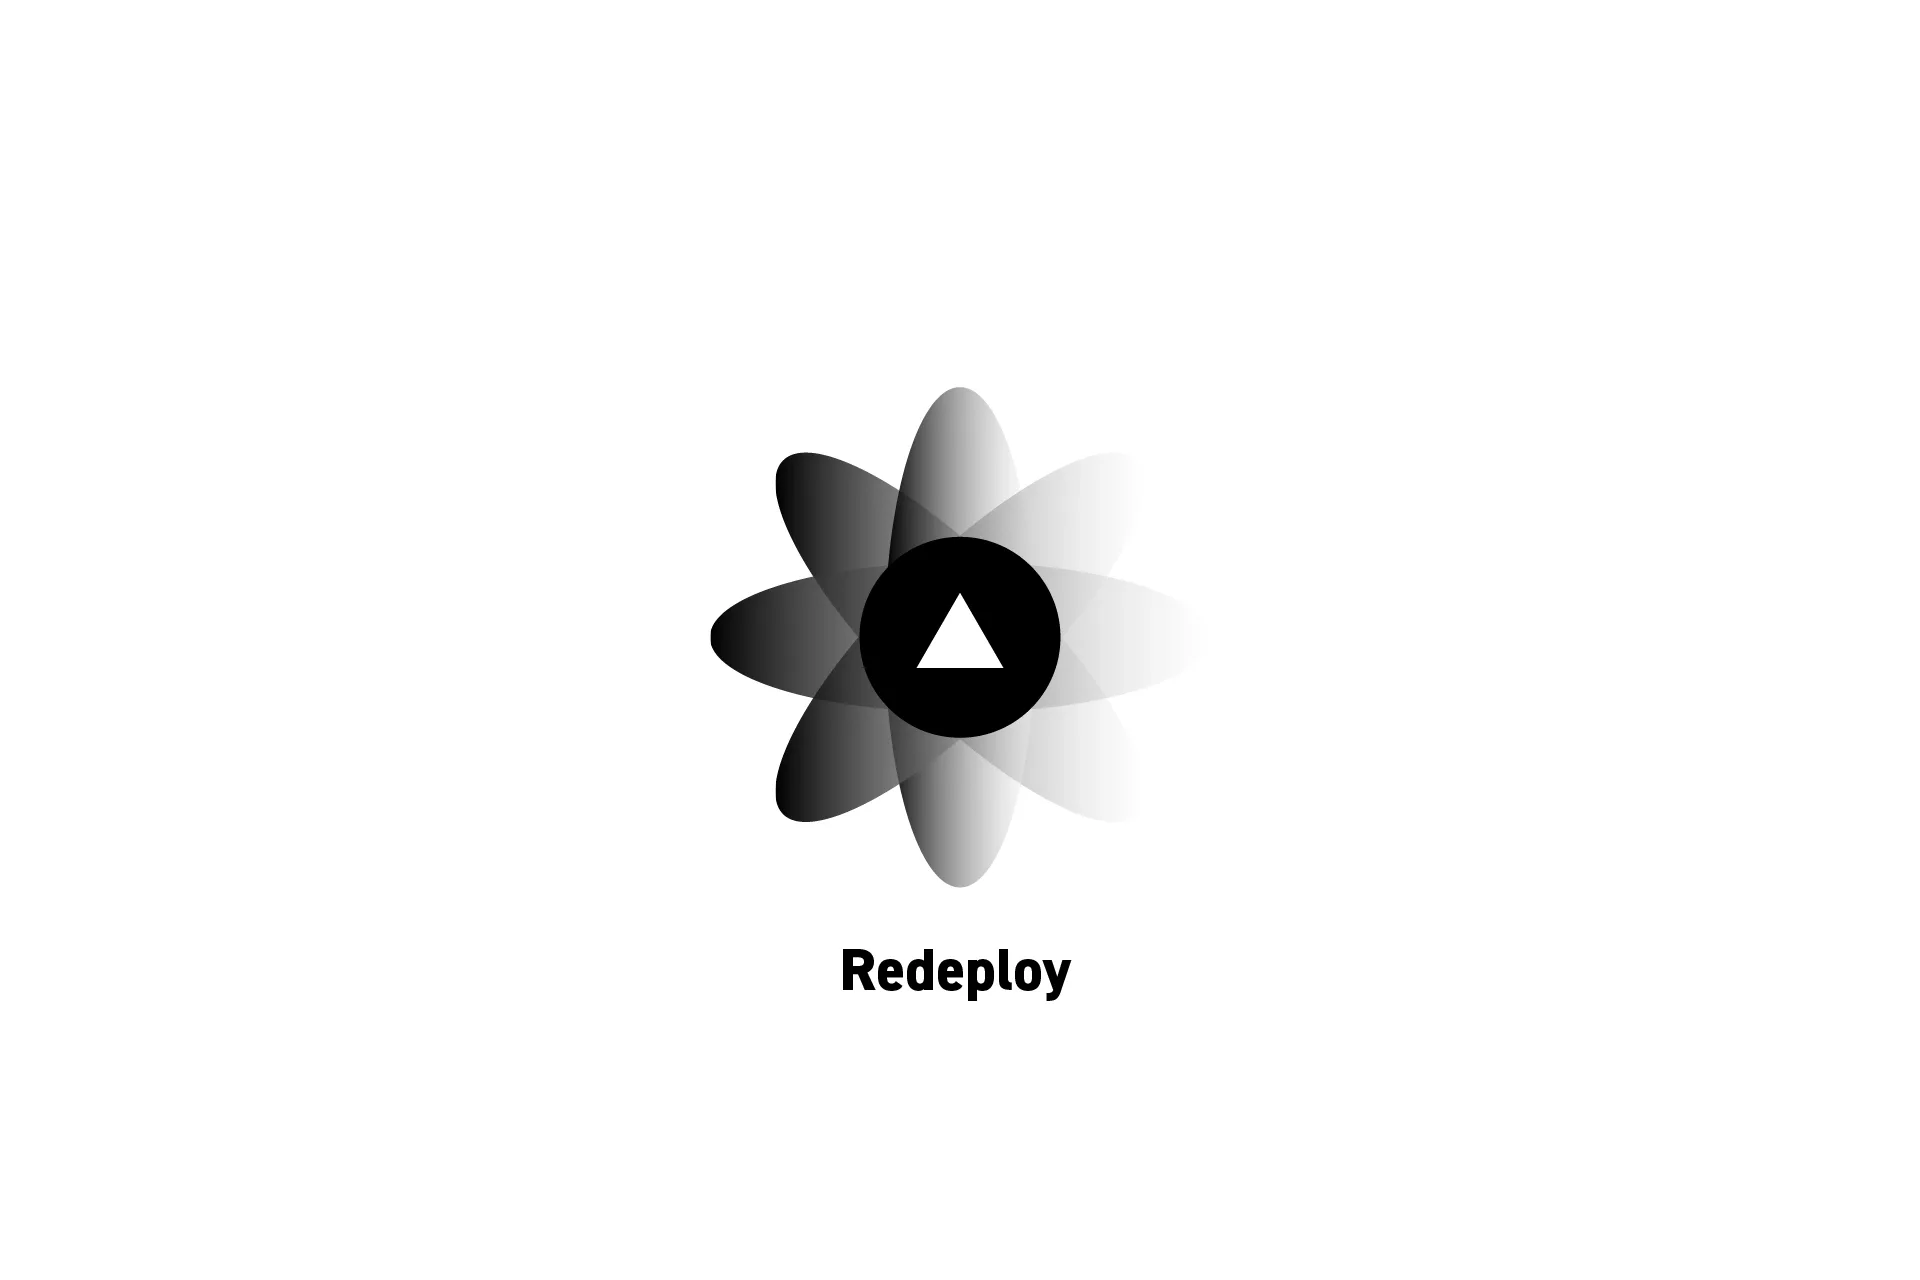 A flower that represents Vercel with the text "Redeploy” beneath it.